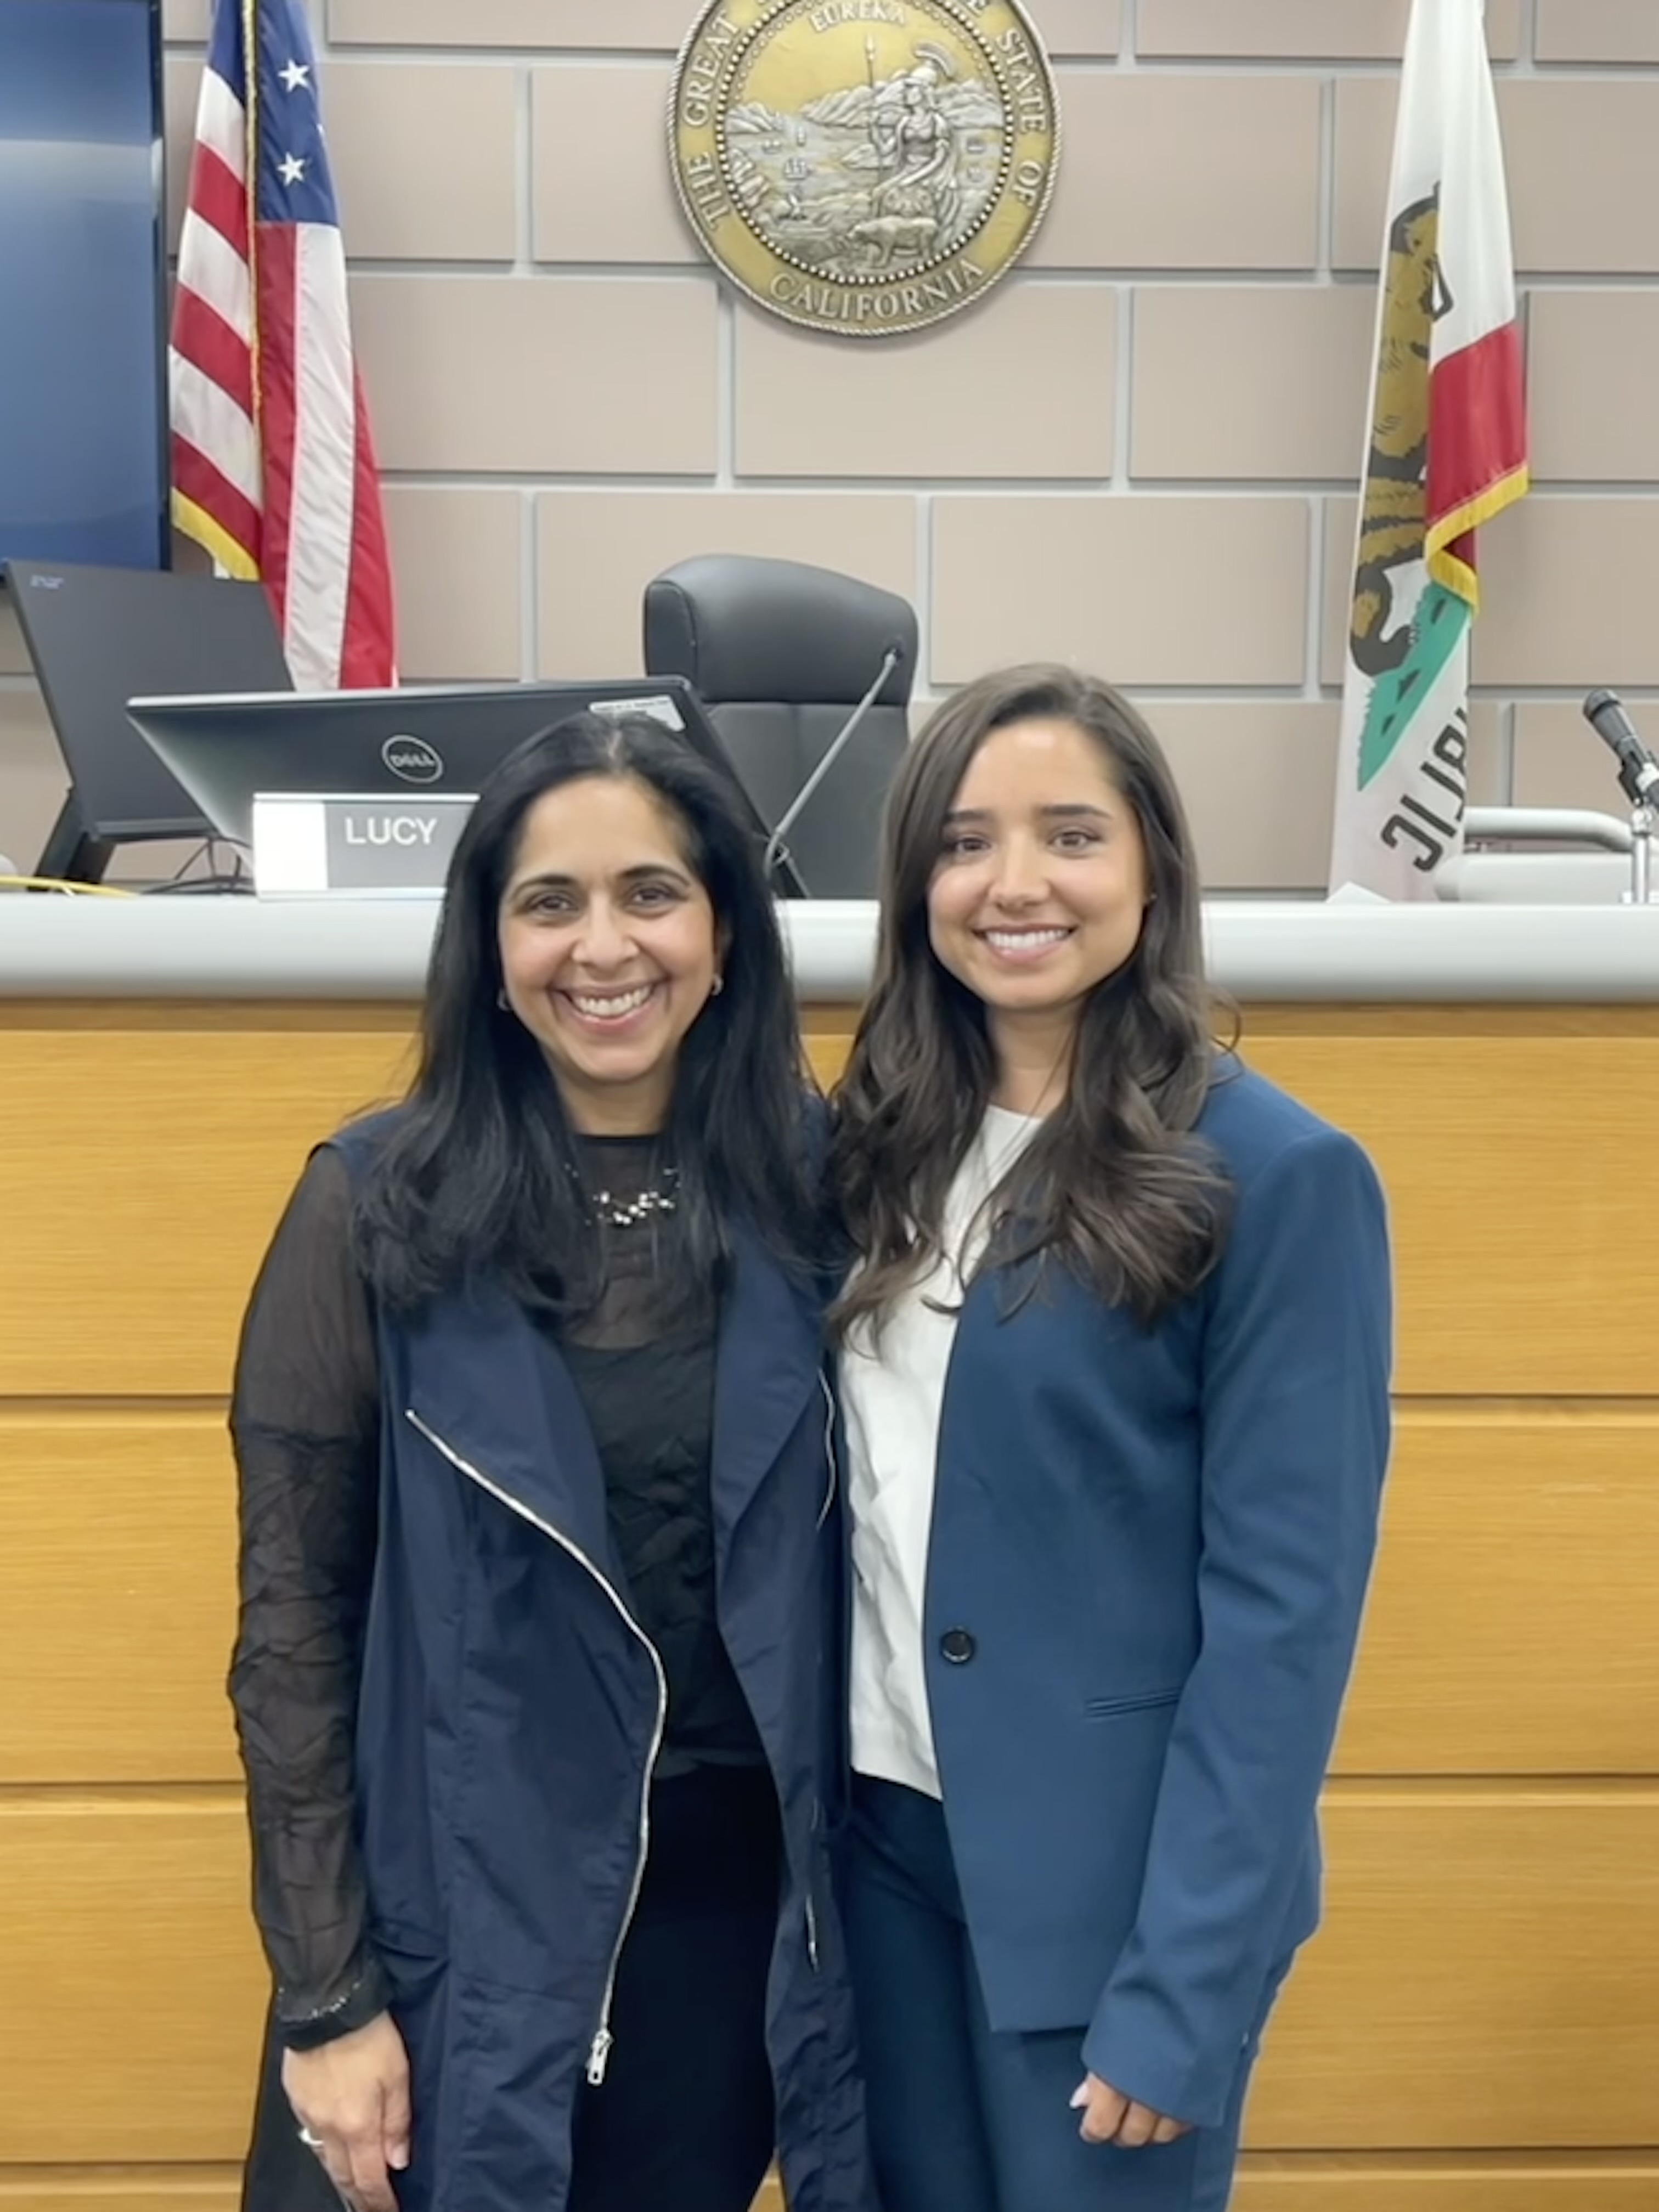 Sharmila Lodhia, associate professor and chair of the Women's and Gender Studies department, pictured with Mirelle Raza at her swearing-in ceremony.